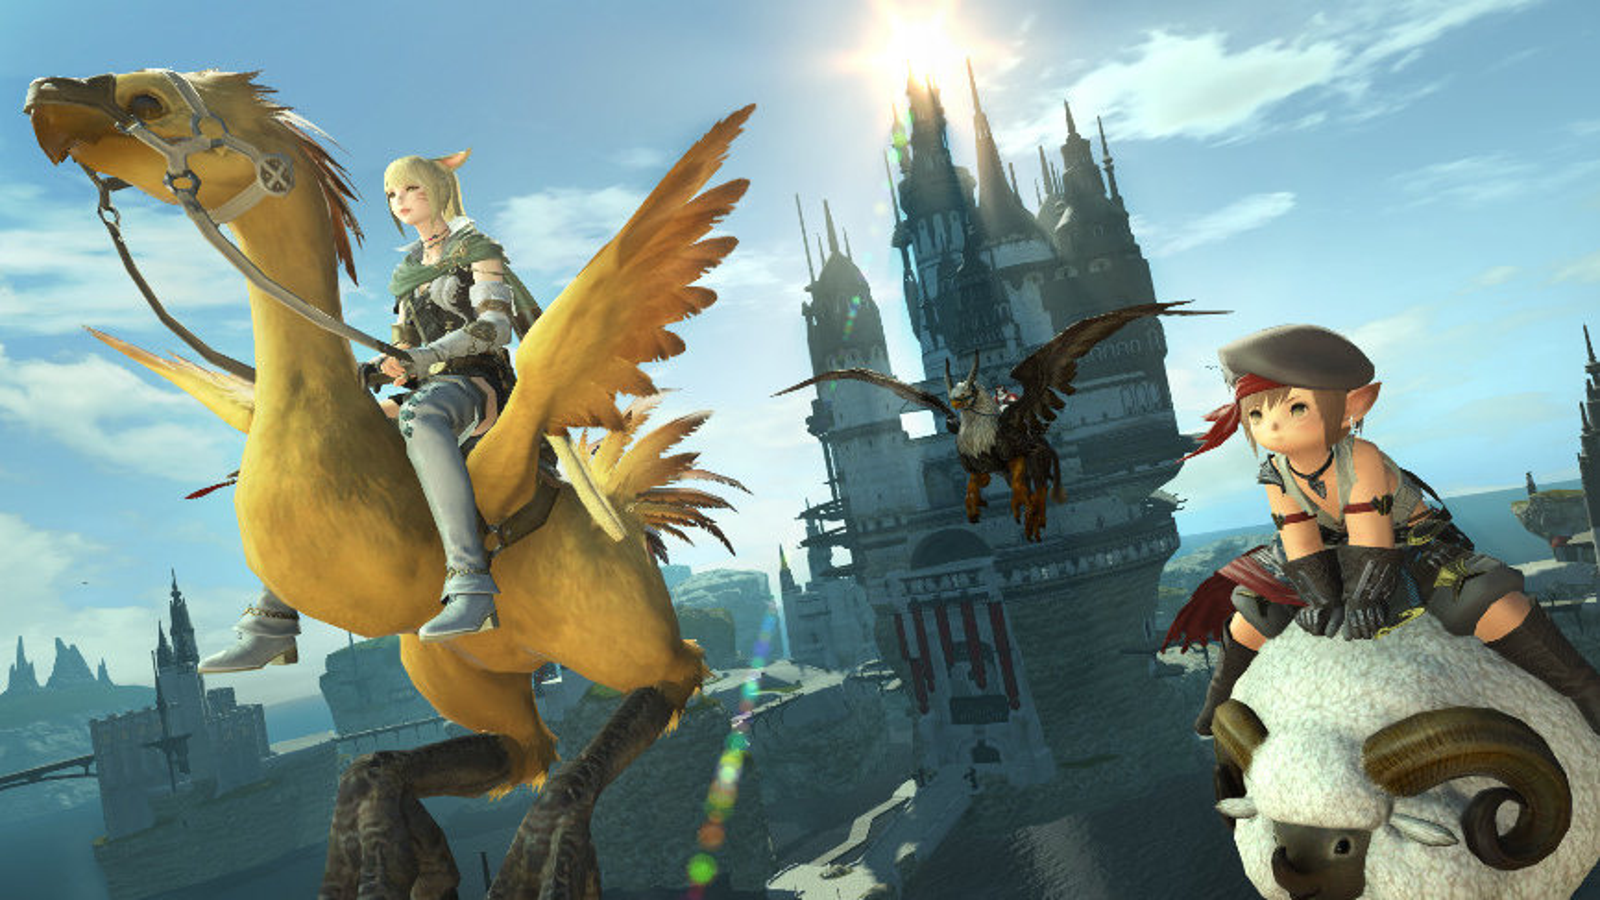 FINAL FANTASY XIV on X: The #FFXIV Free Trial has returned! 🤩   Play through the entirety of A Realm Reborn and  Heavensward expansions up to level 60 for free with no